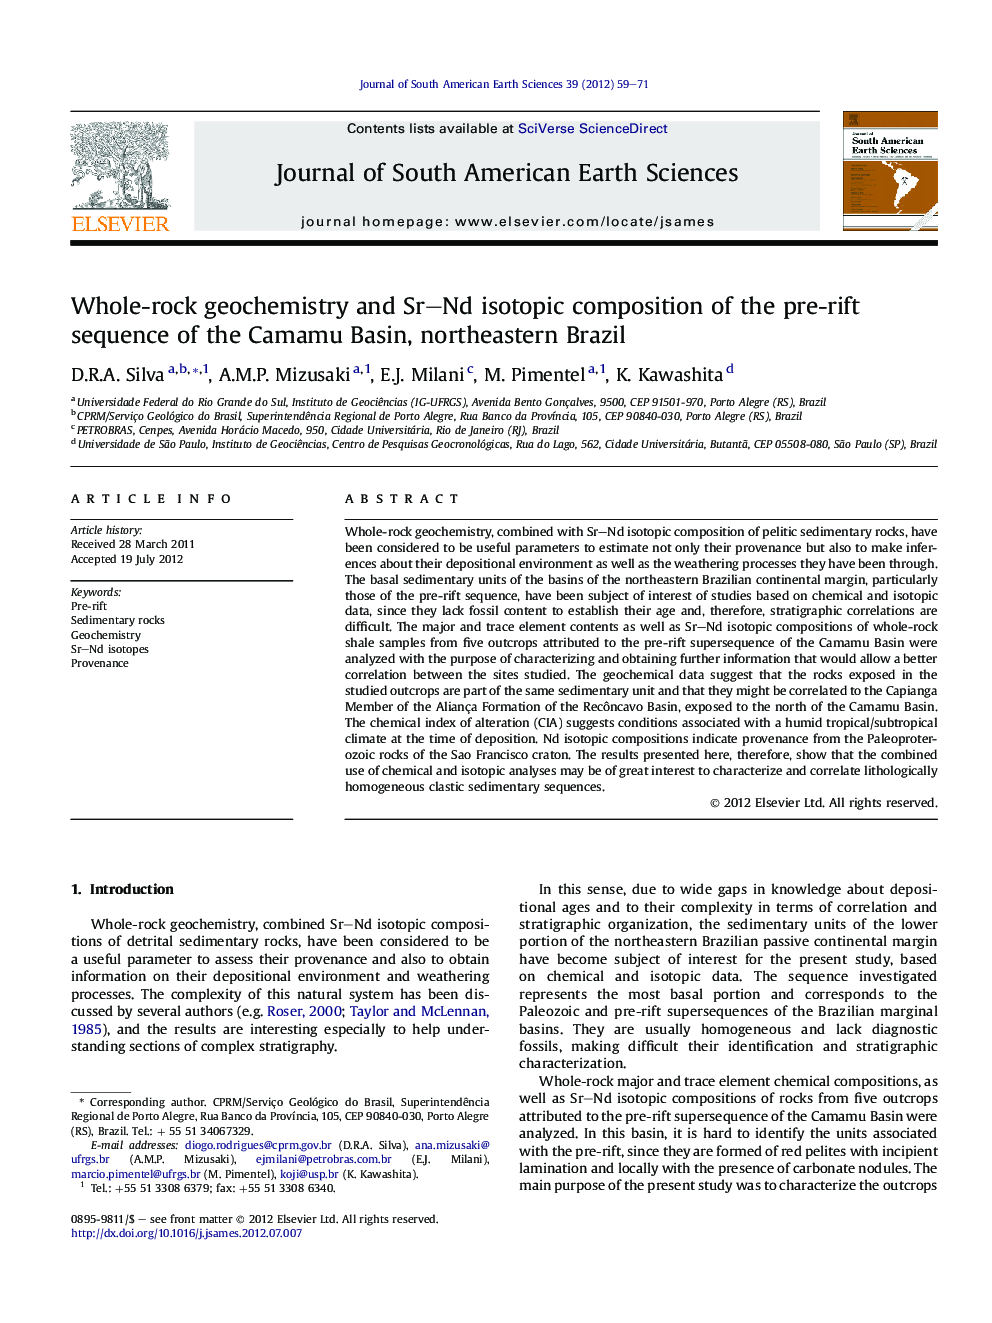 Whole-rock geochemistry and Sr–Nd isotopic composition of the pre-rift sequence of the Camamu Basin, northeastern Brazil